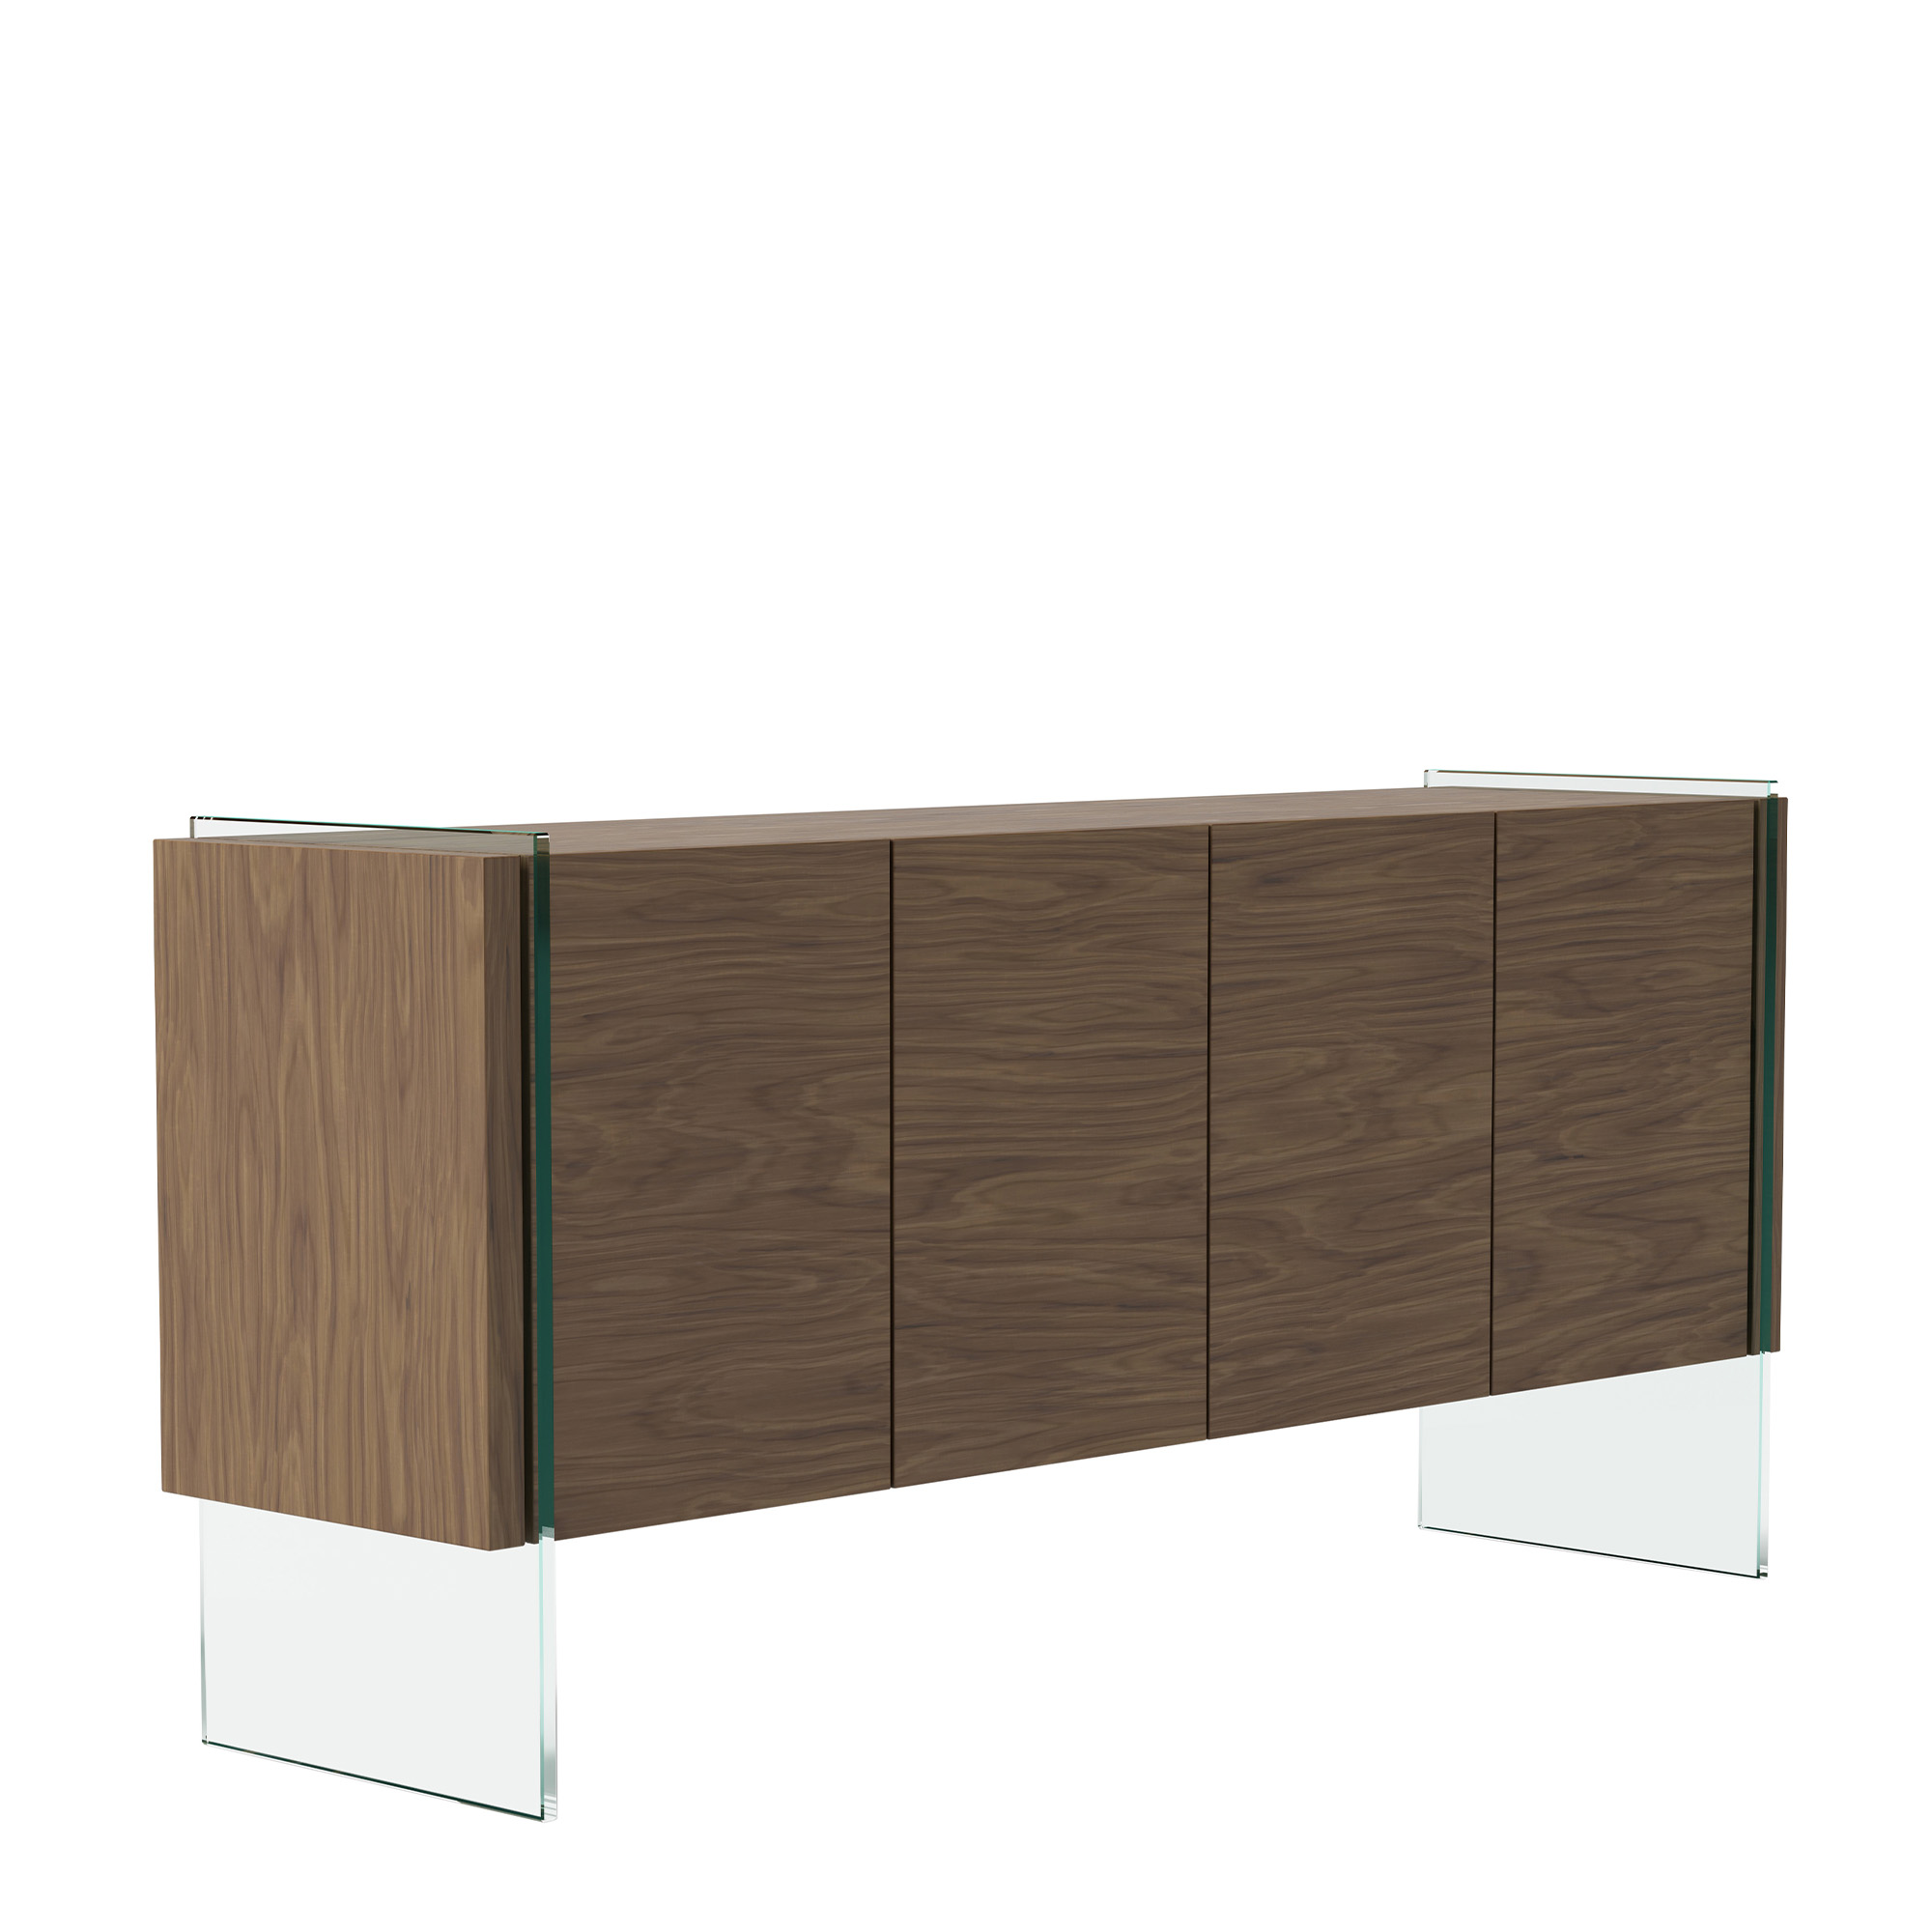 Walnut wood sideboard and tempered glass